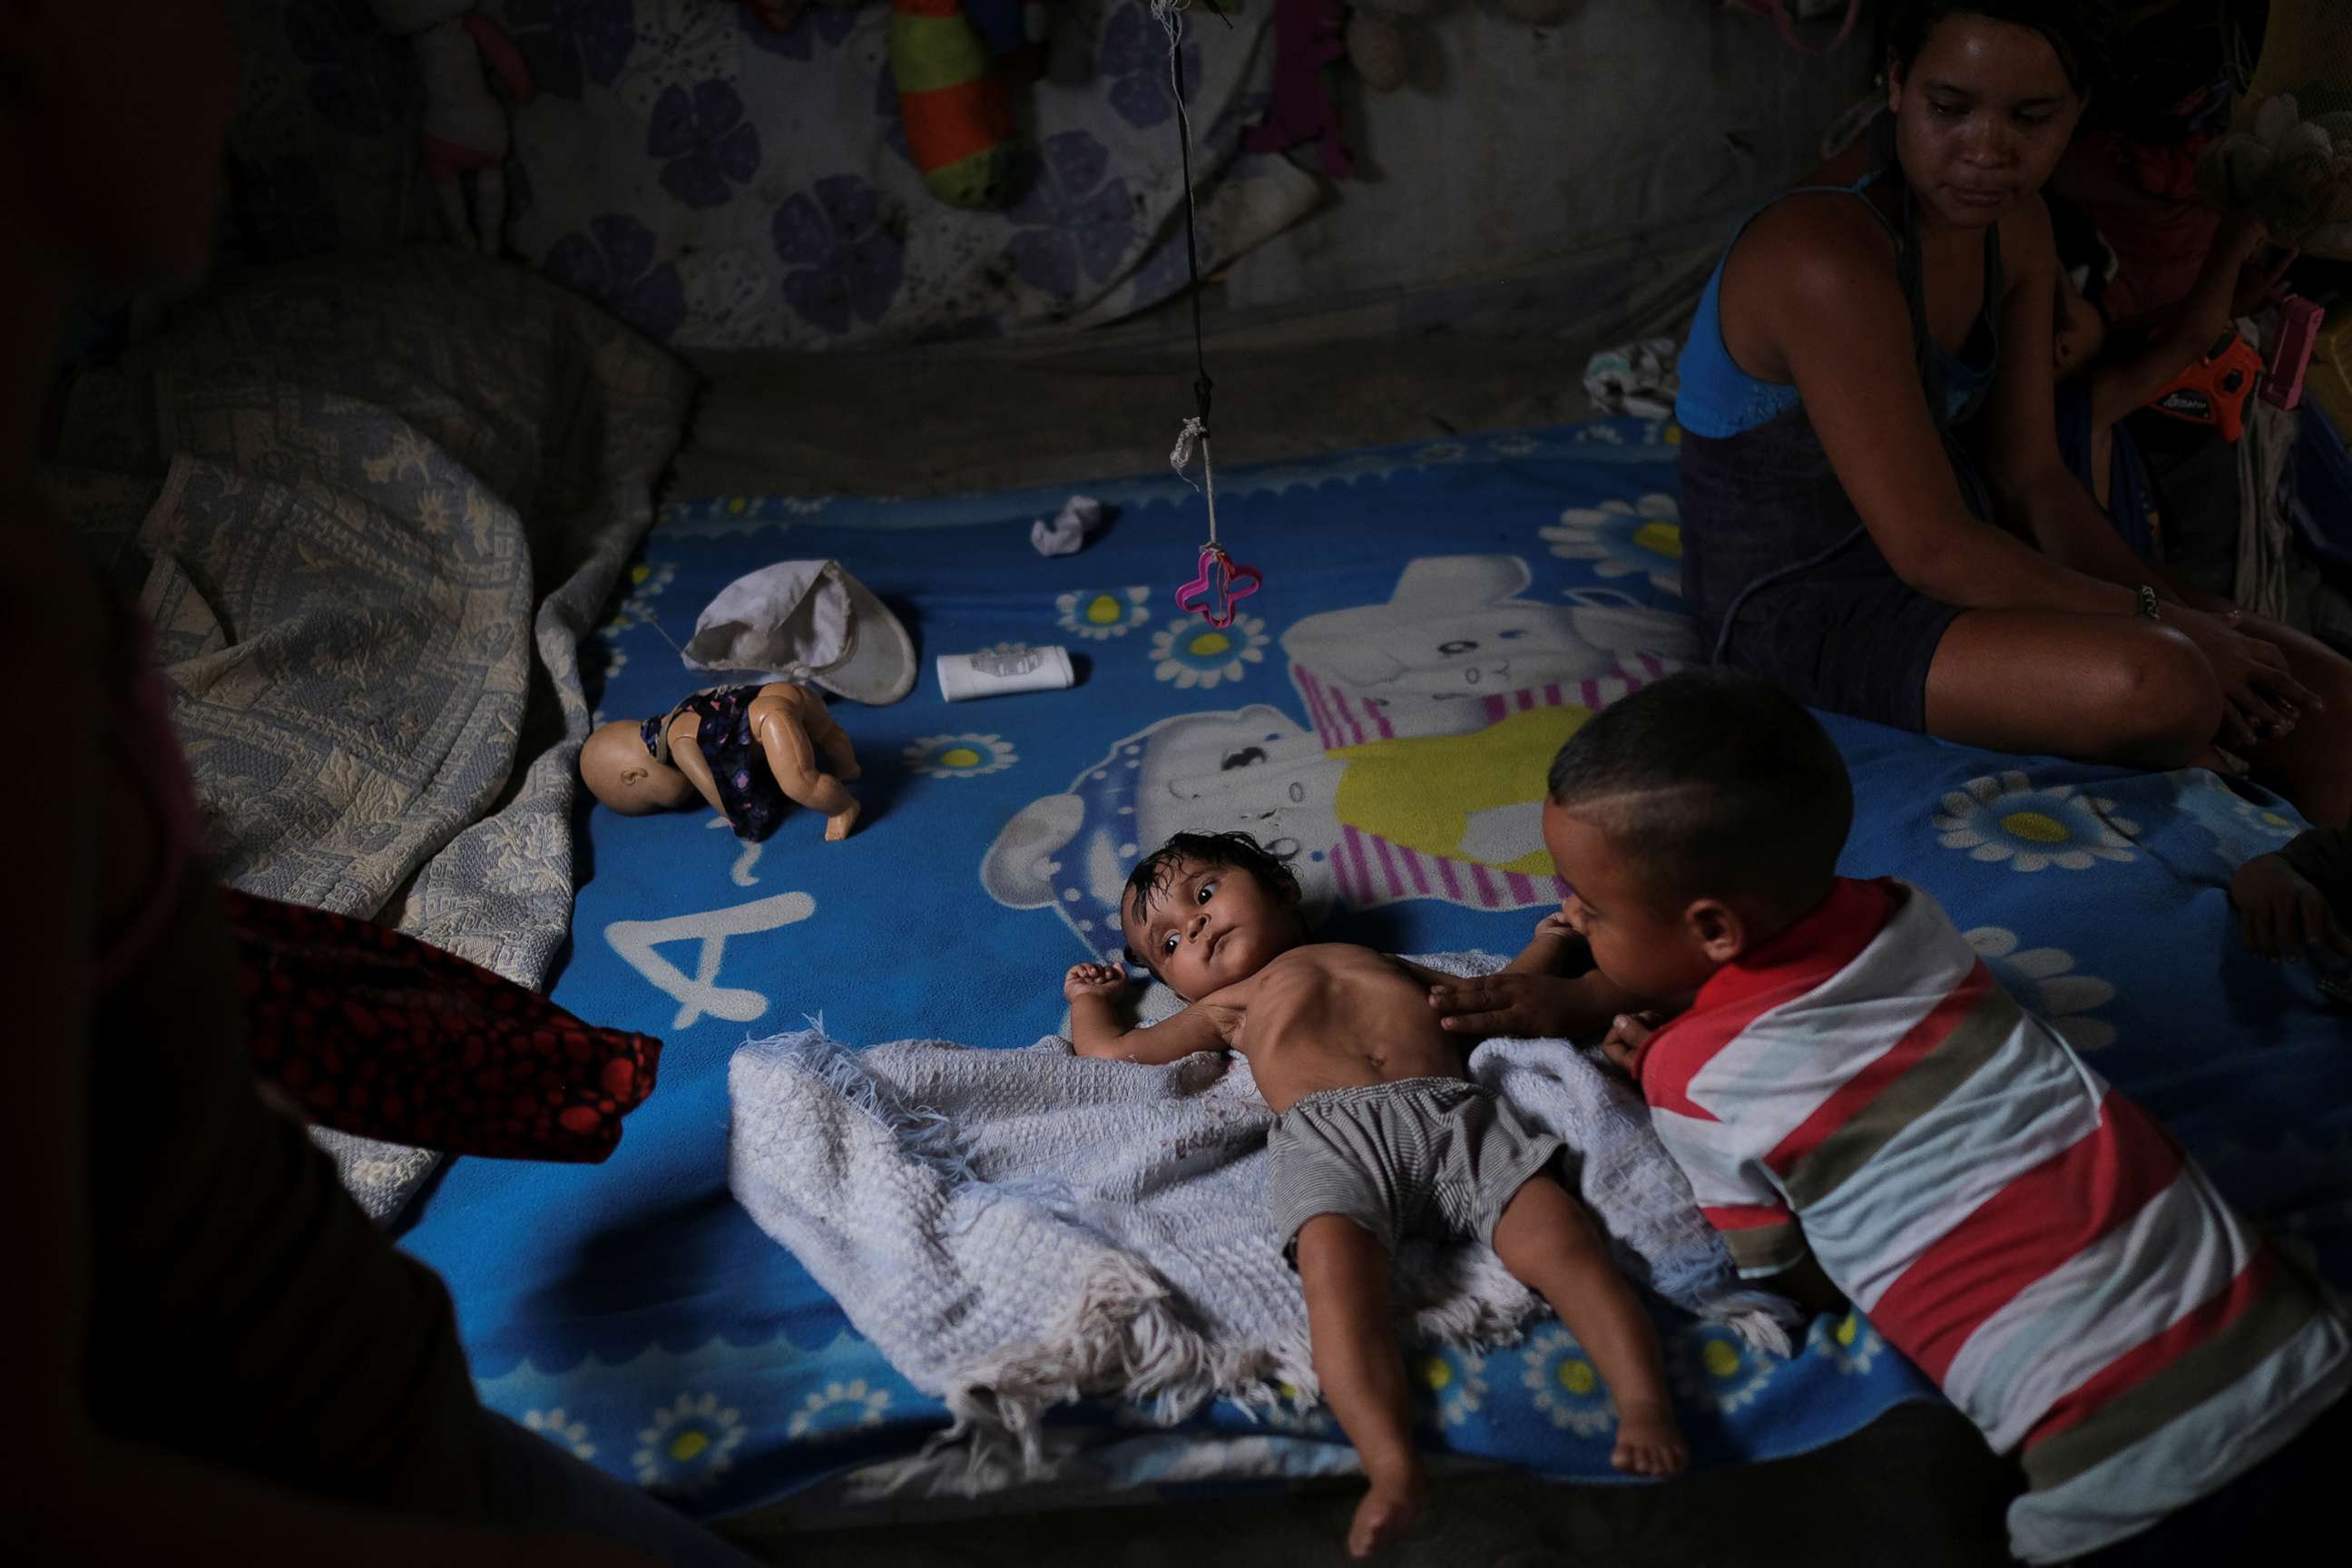 PHOTO: Gregoria Hernandez, 23, sits next to her seven-moth-old daughter Sonia, who according to her has diarrhoea and is underweight, while resting on a bed in Barquisimeto, Venezuela, Aug. 16, 2019.